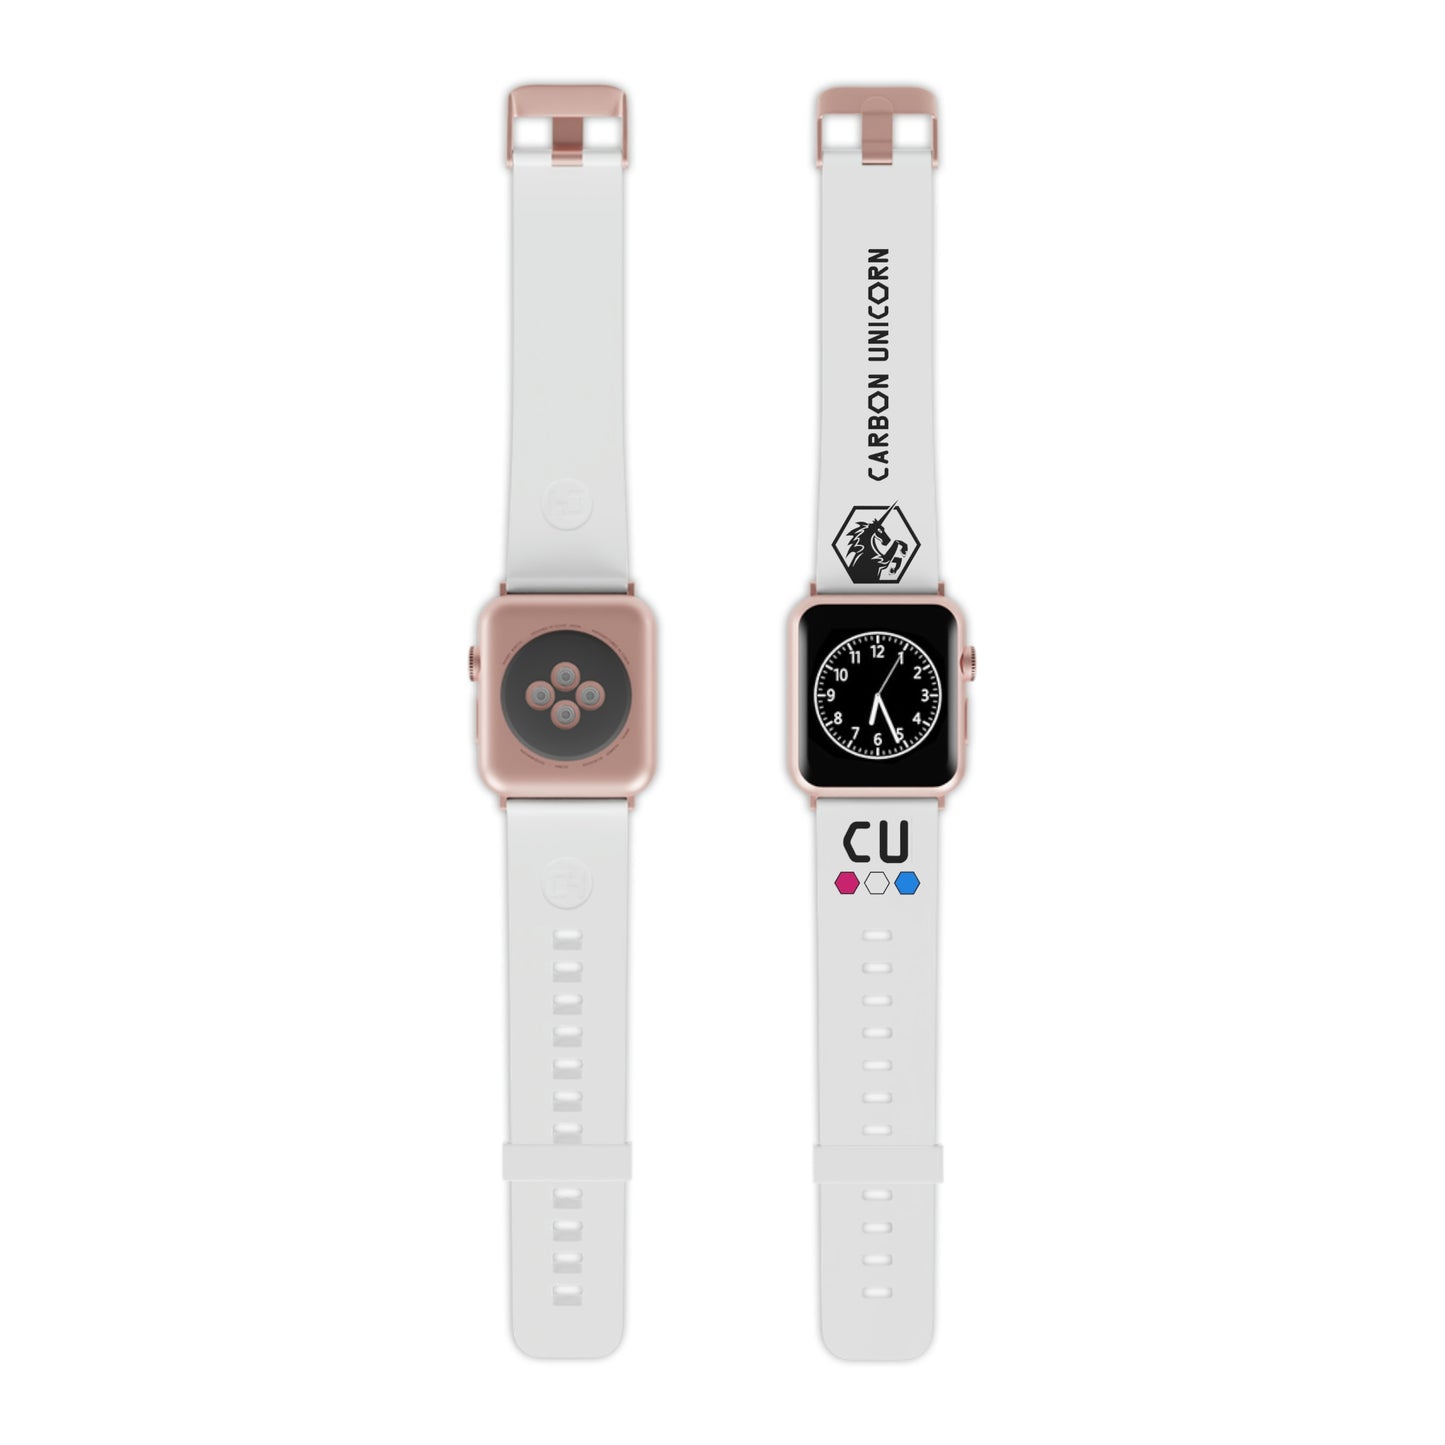 Wrist Bands for Apple Watches